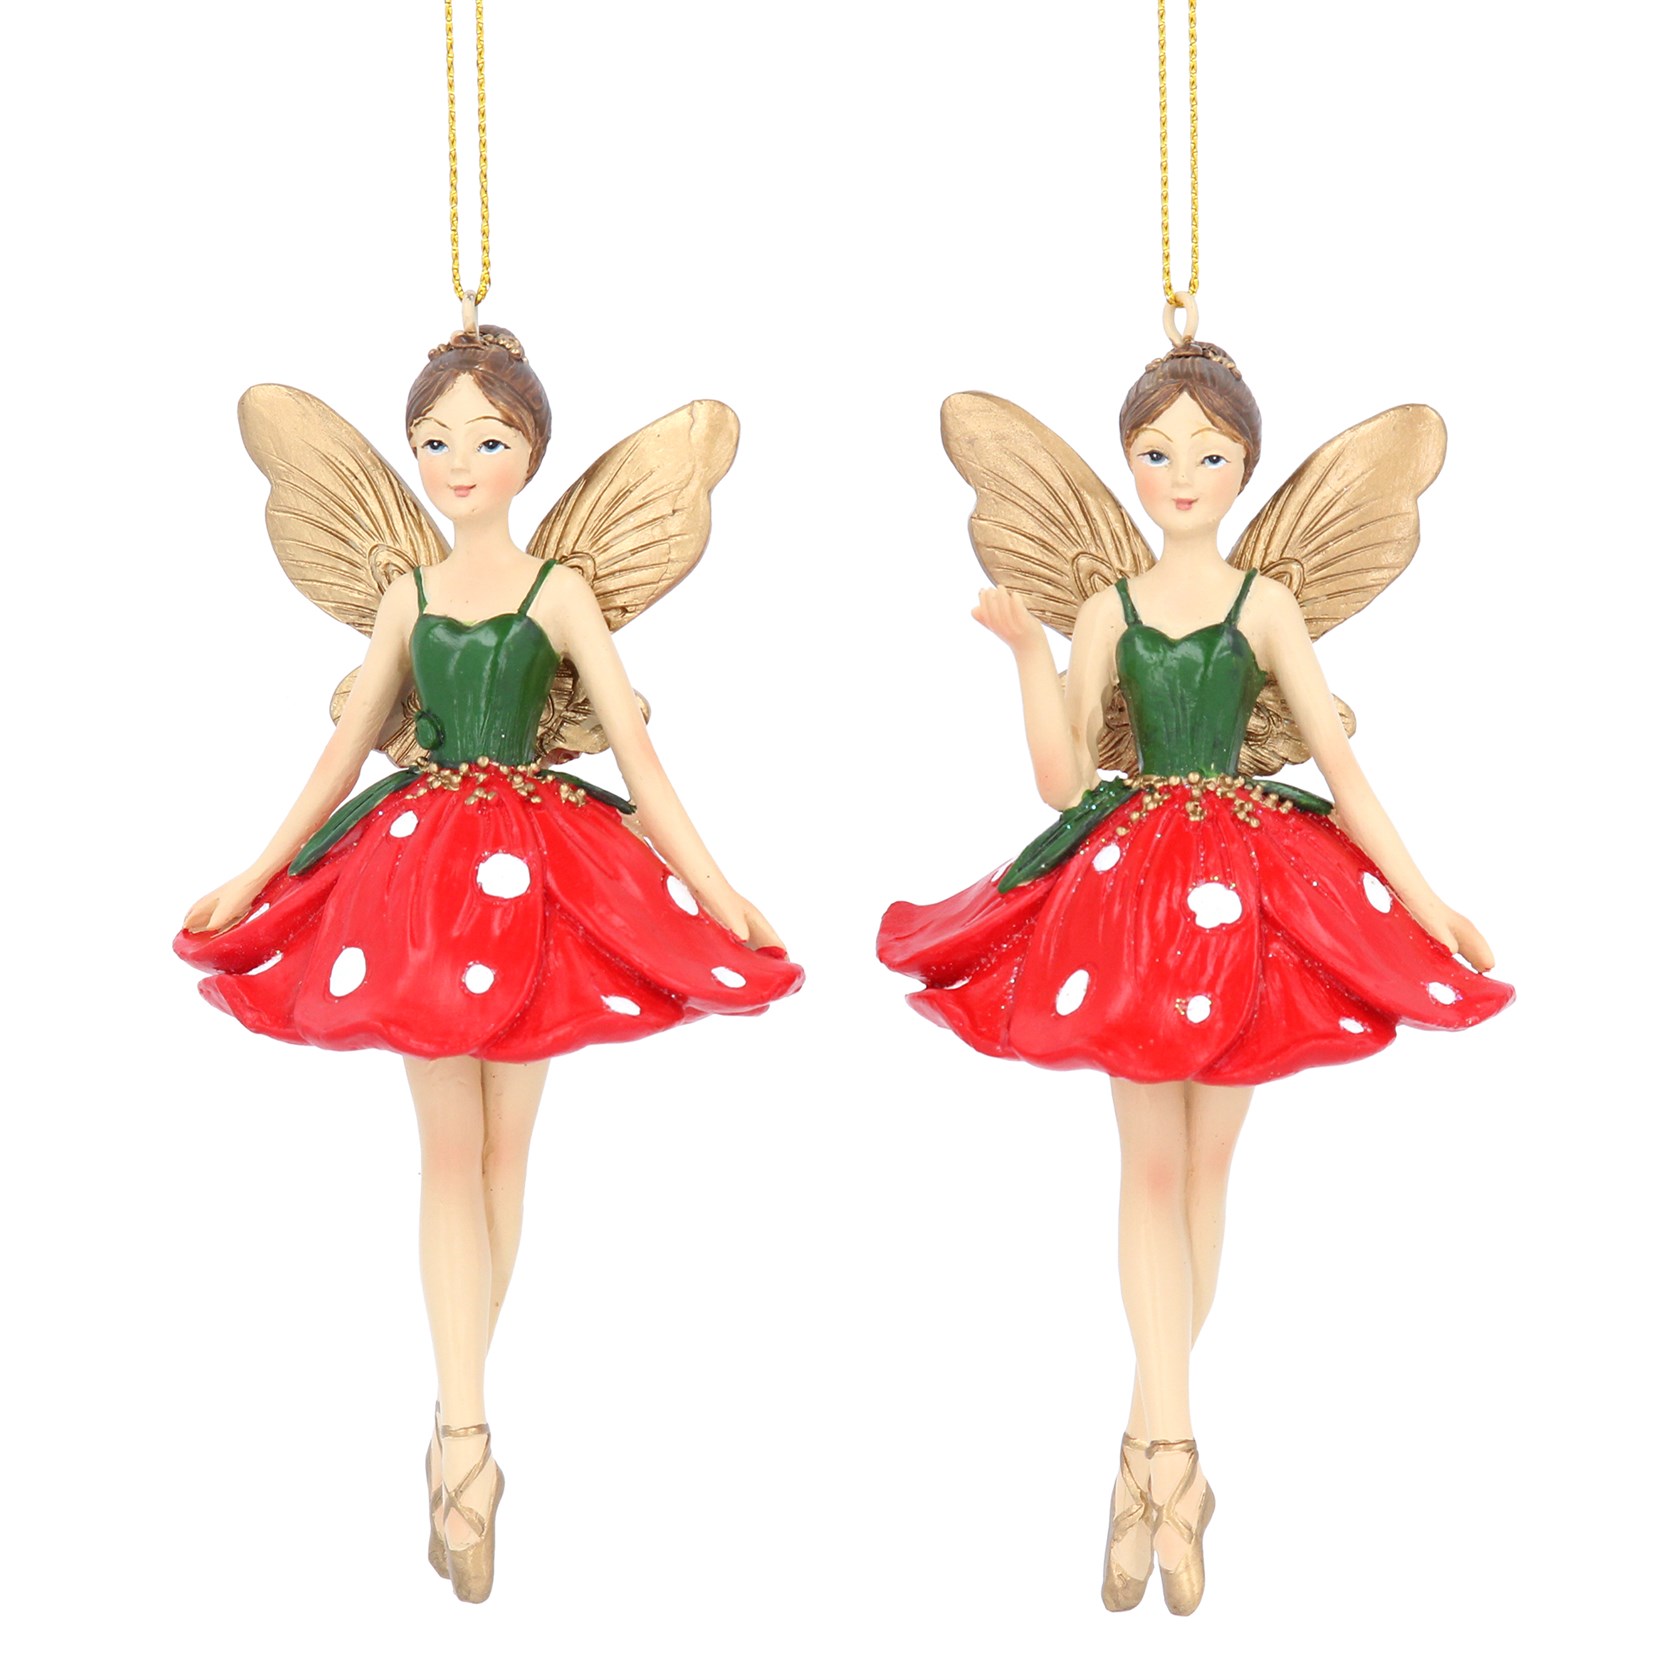 Resin toadstool fairy hanging Christmas decoration. By Gisela Graham. The perfect festive addition to your home.